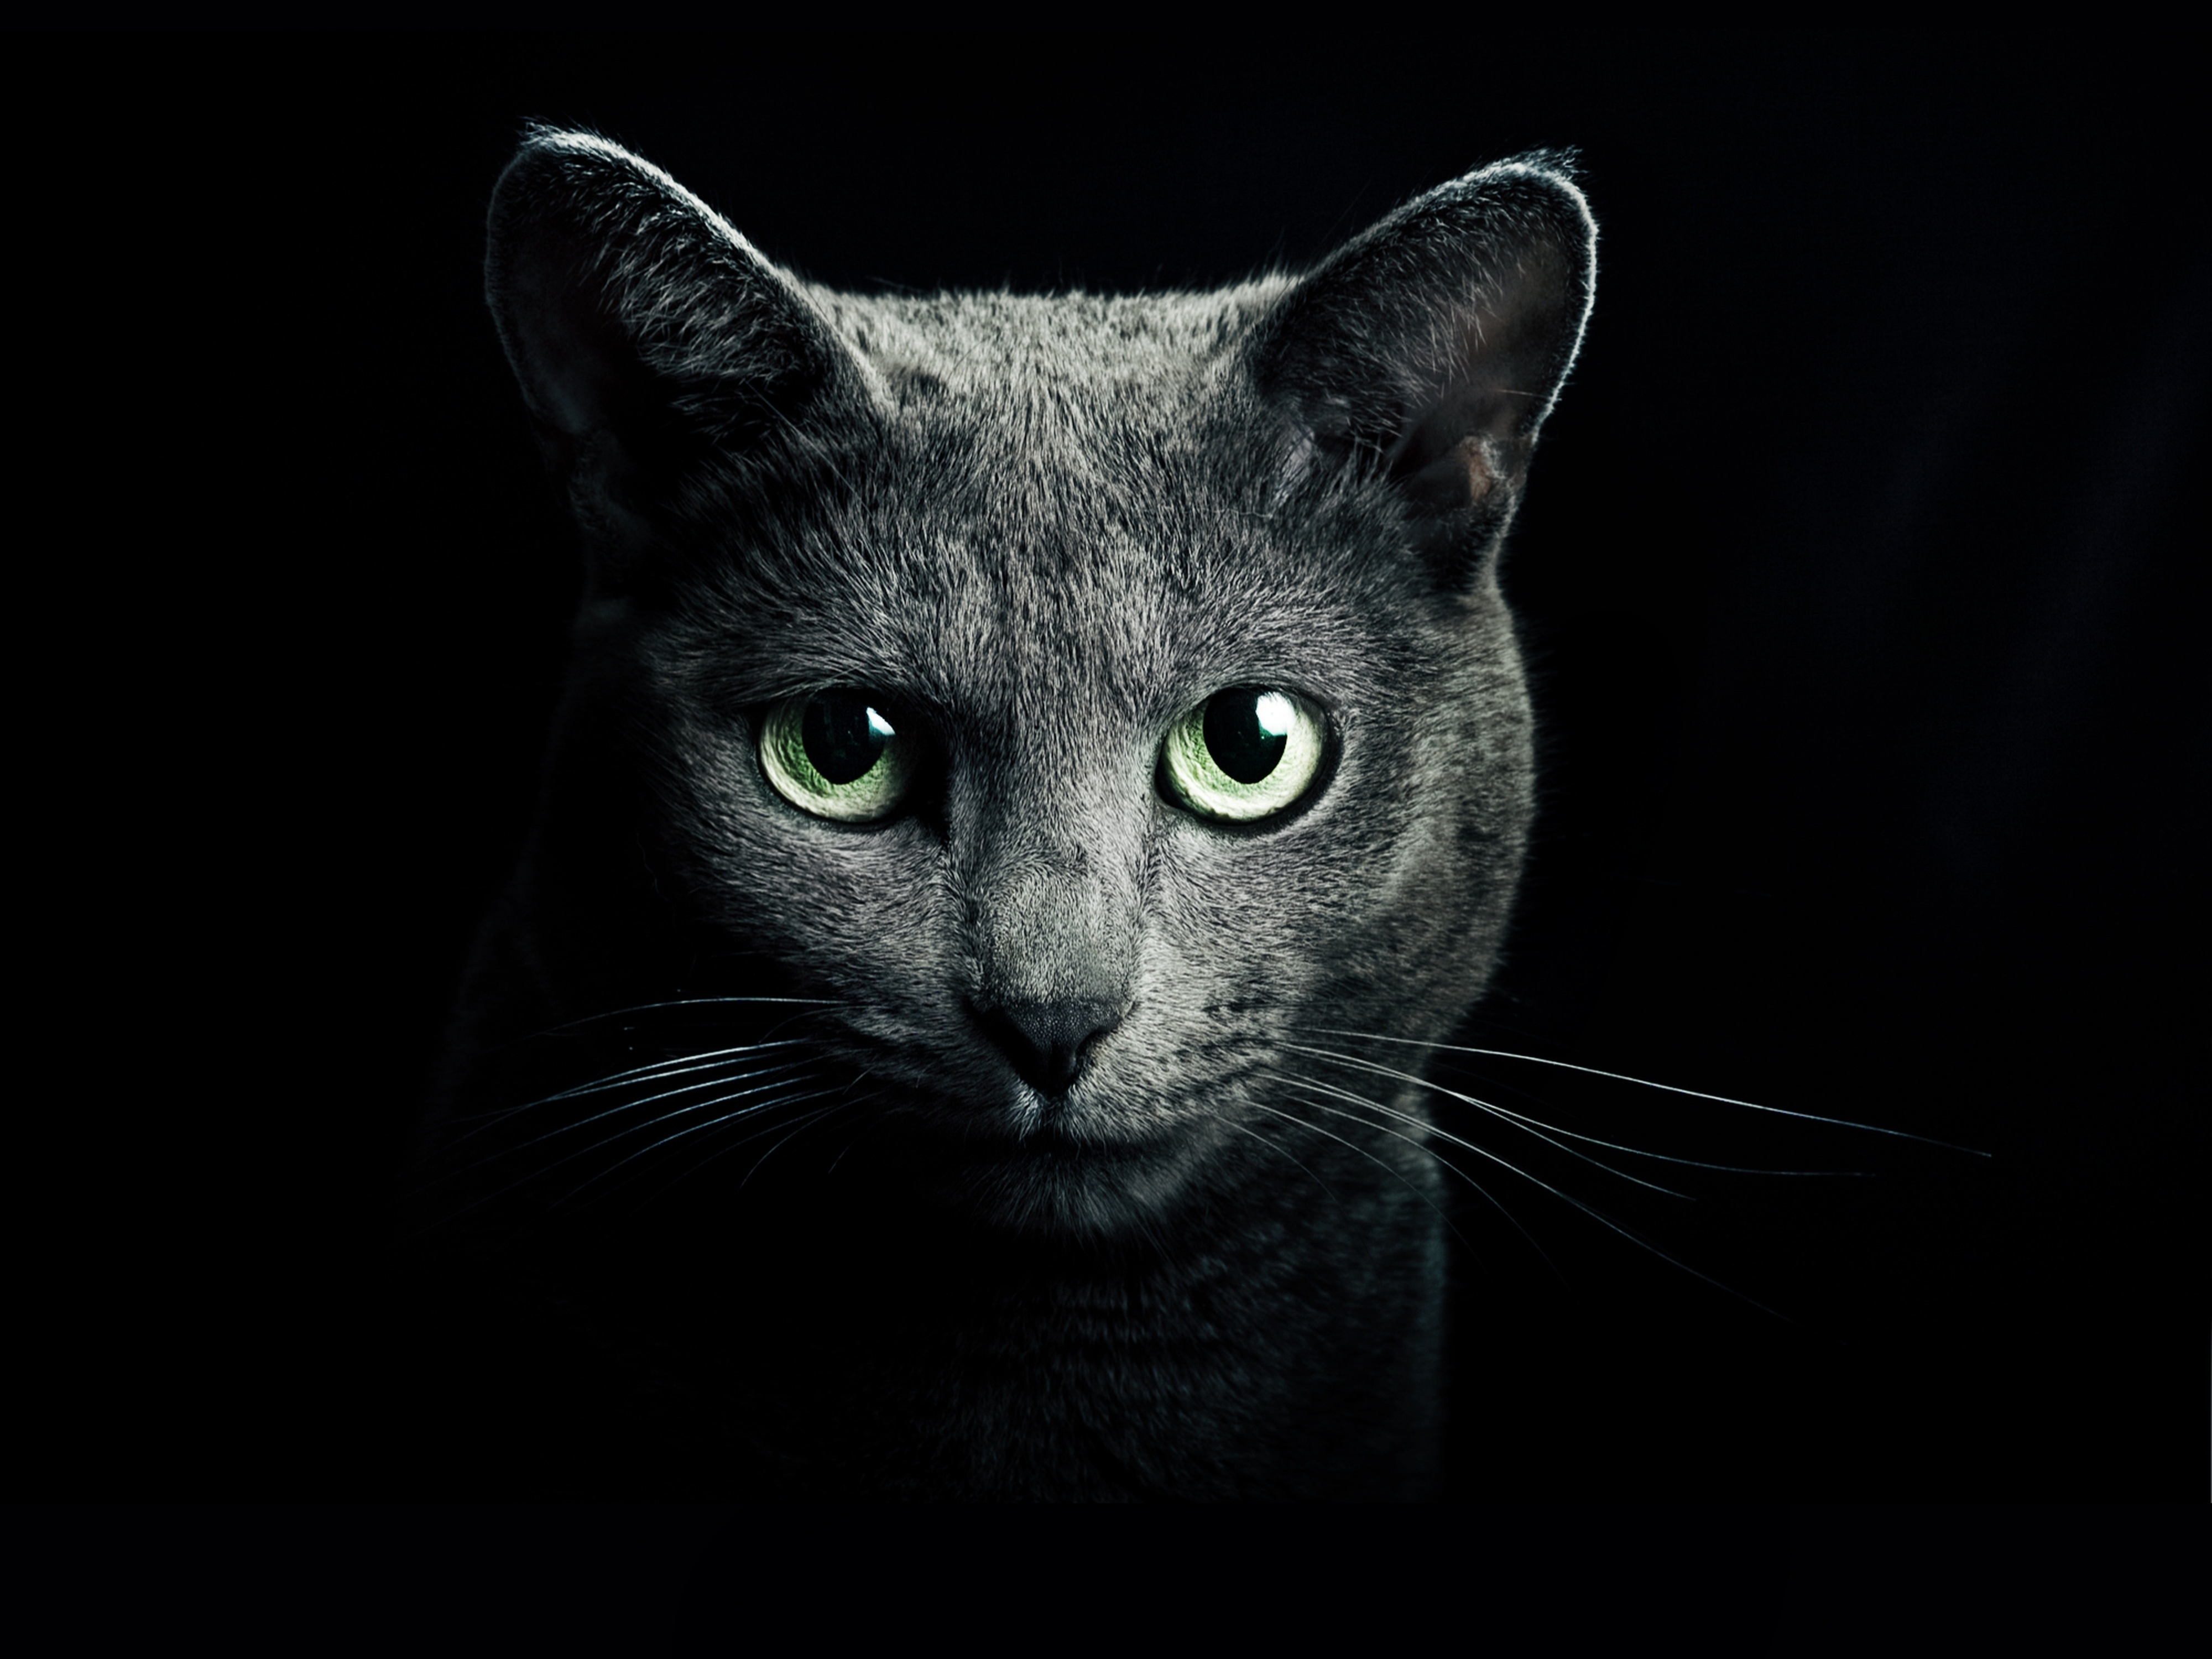 105413 download wallpaper dark, blue, eyes, cat, opinion, green, grey, sight, black background, breed, russian screensavers and pictures for free